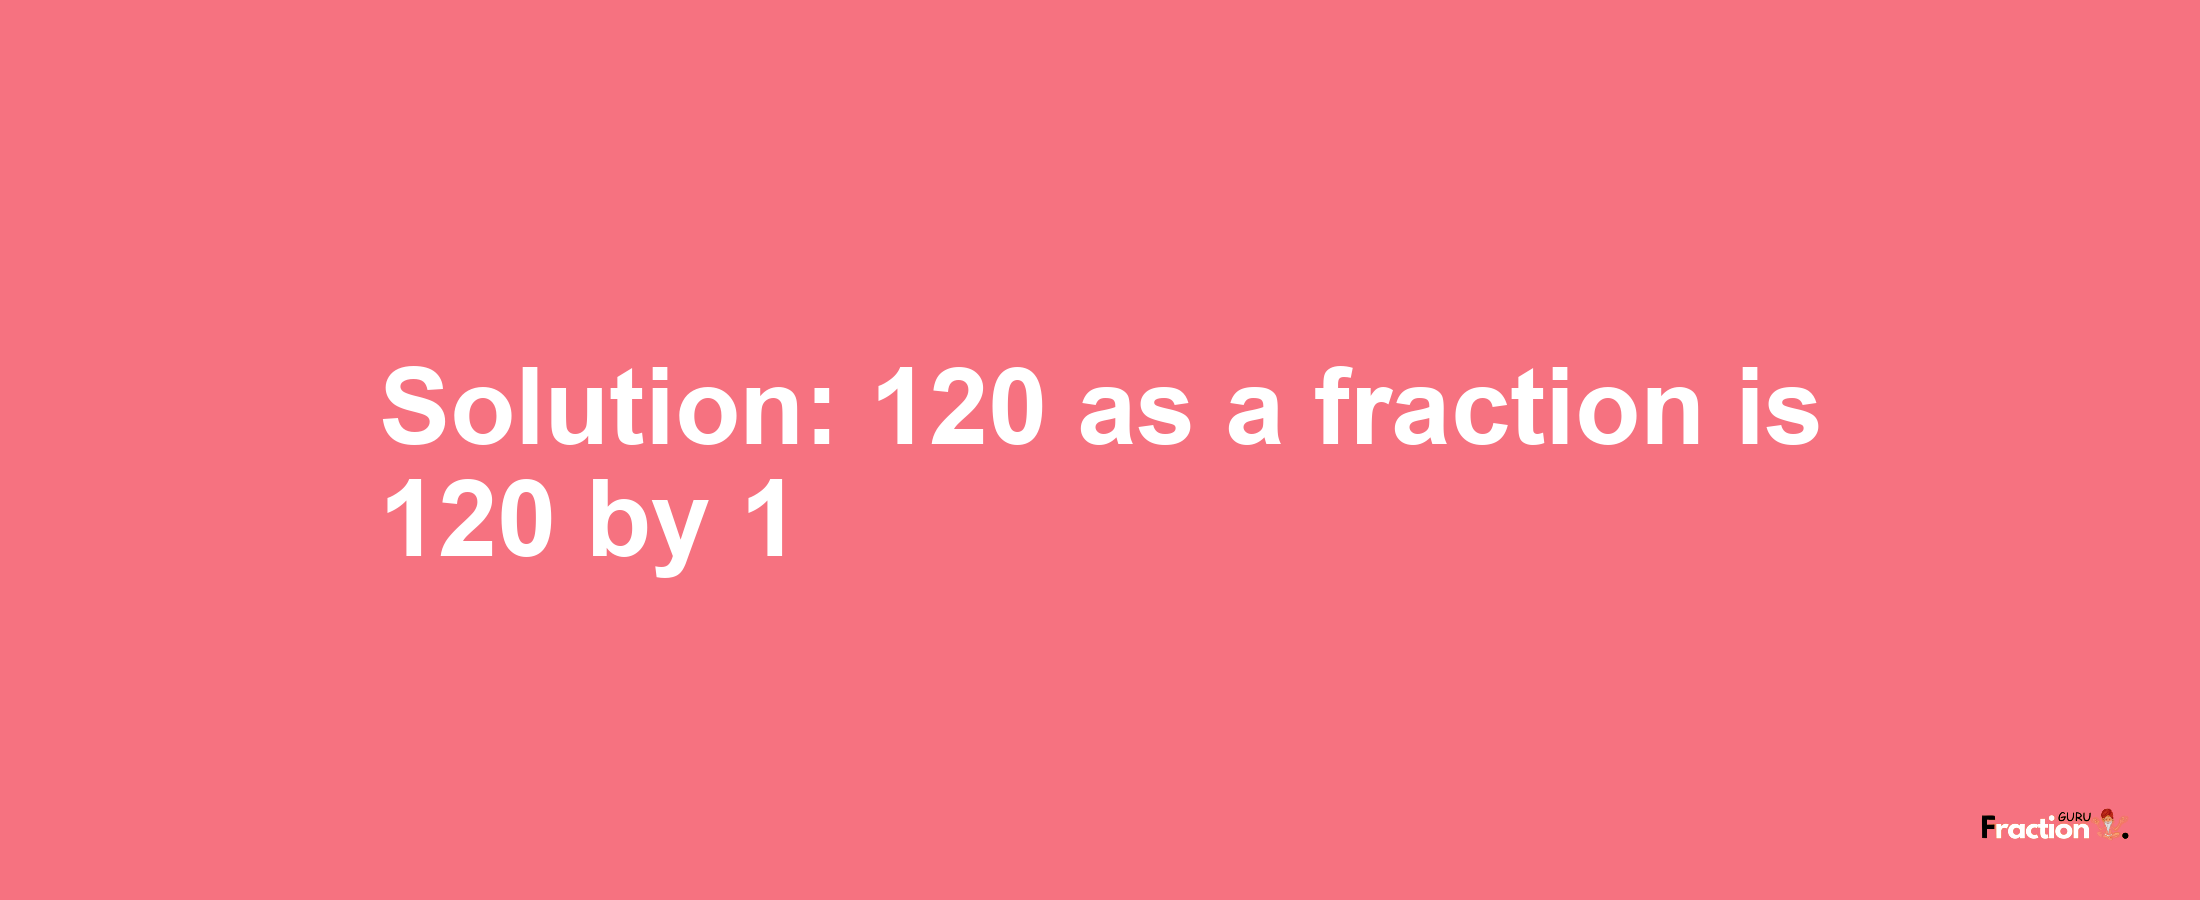 Solution:120 as a fraction is 120/1